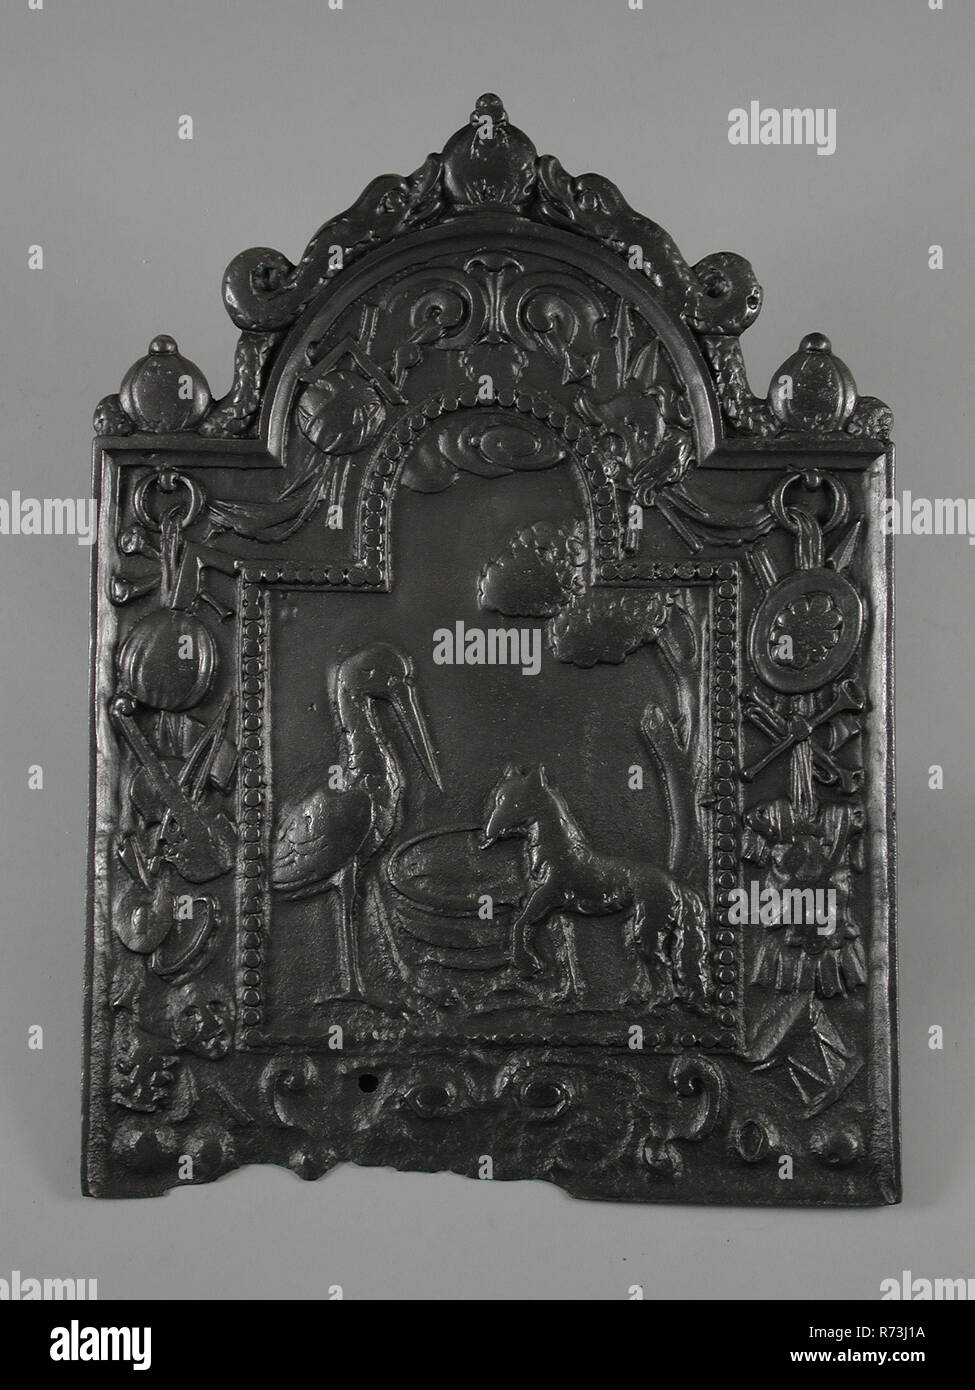 Fireback fable of fox and stork, after the fables of Jean de la Fontaine (1621-1695), fire place, cast Rectangular base with curved top with dolphins In the middle the first part of the fable of the fox and the stork Around wide border between the frame and the pearl necklace decorated with weaponry cuirass and various musical instruments living environment interior heating fable Jean de la Fontaine Stock Photo